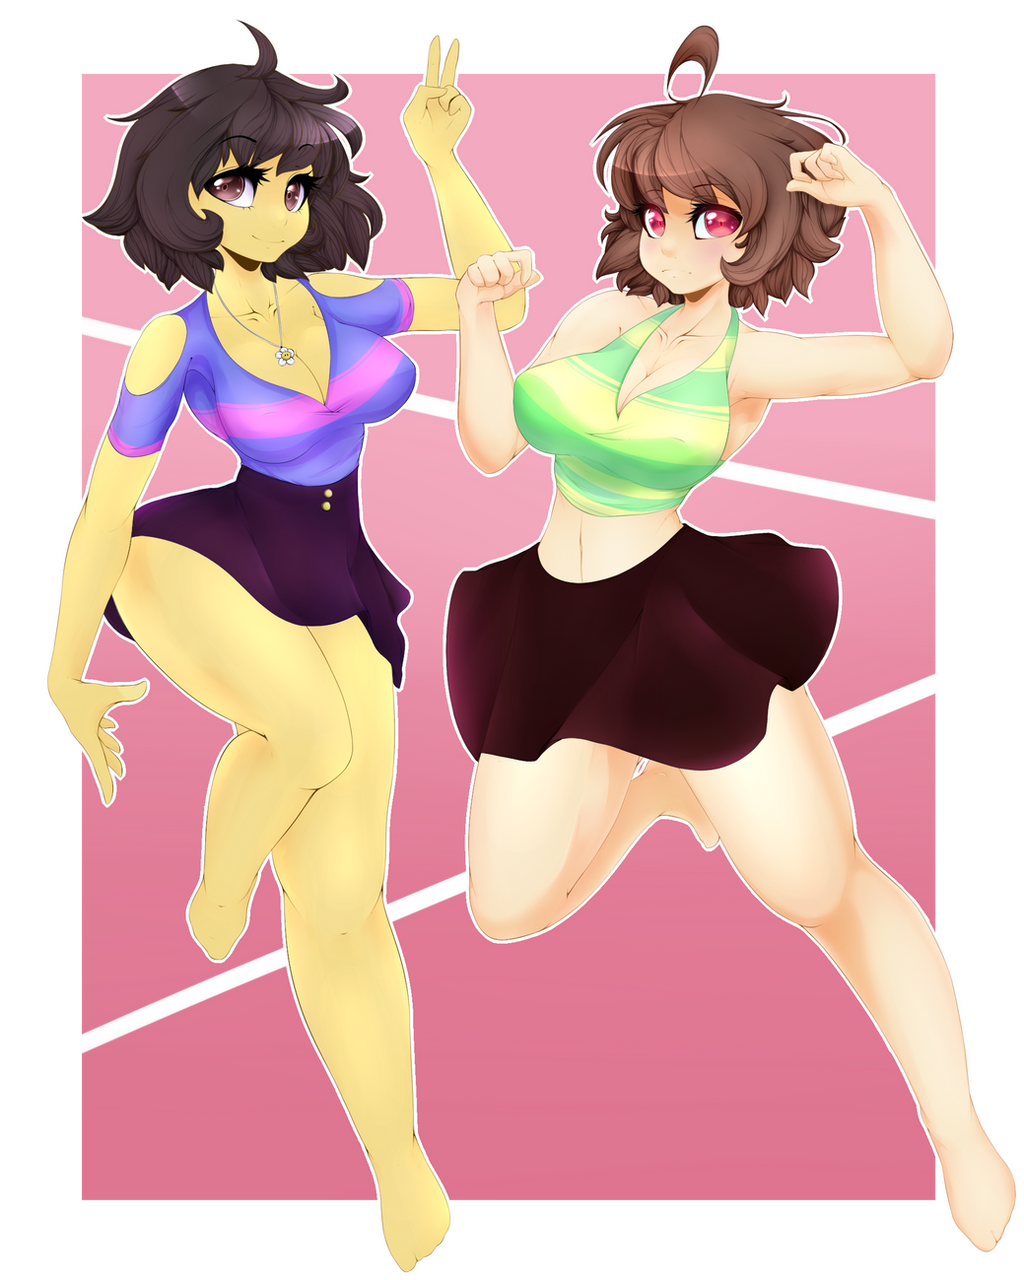 chara_x_frisk_by_ayloulou-db7s6c1.png